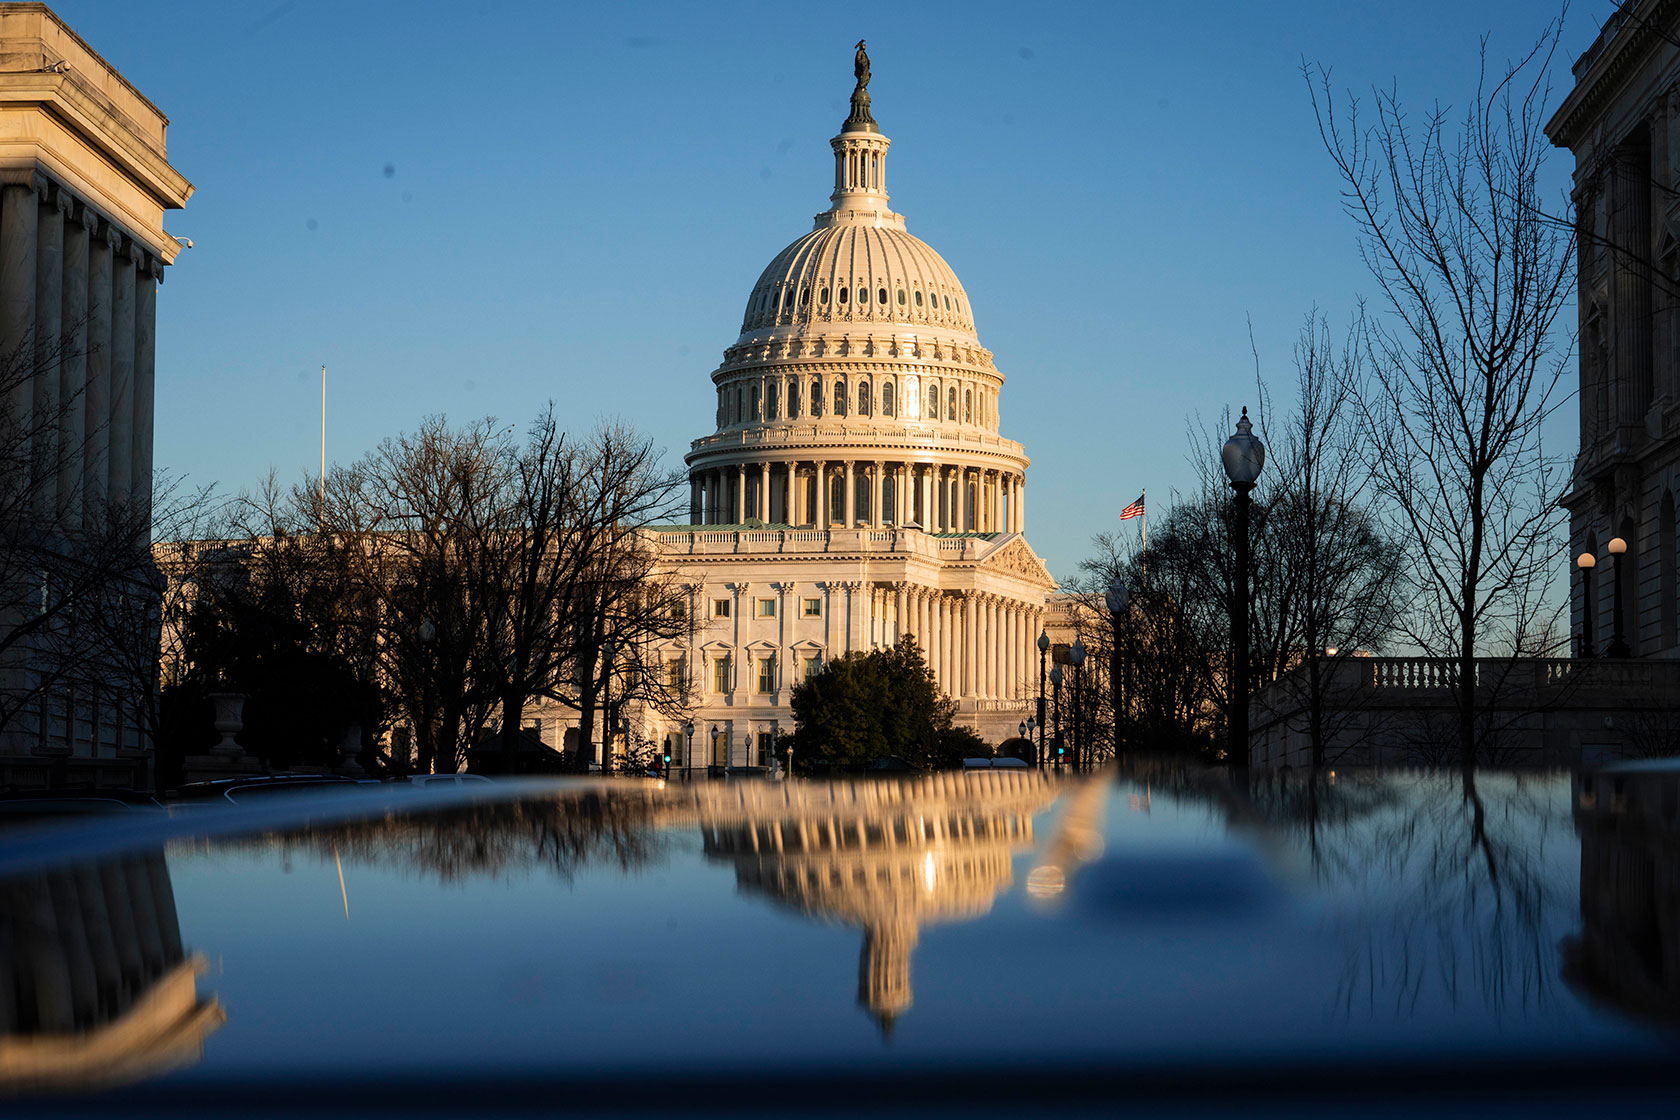 Photo shows a view of the Capitol building against a blue sky, partly reflected in a shiny surface in the foreground